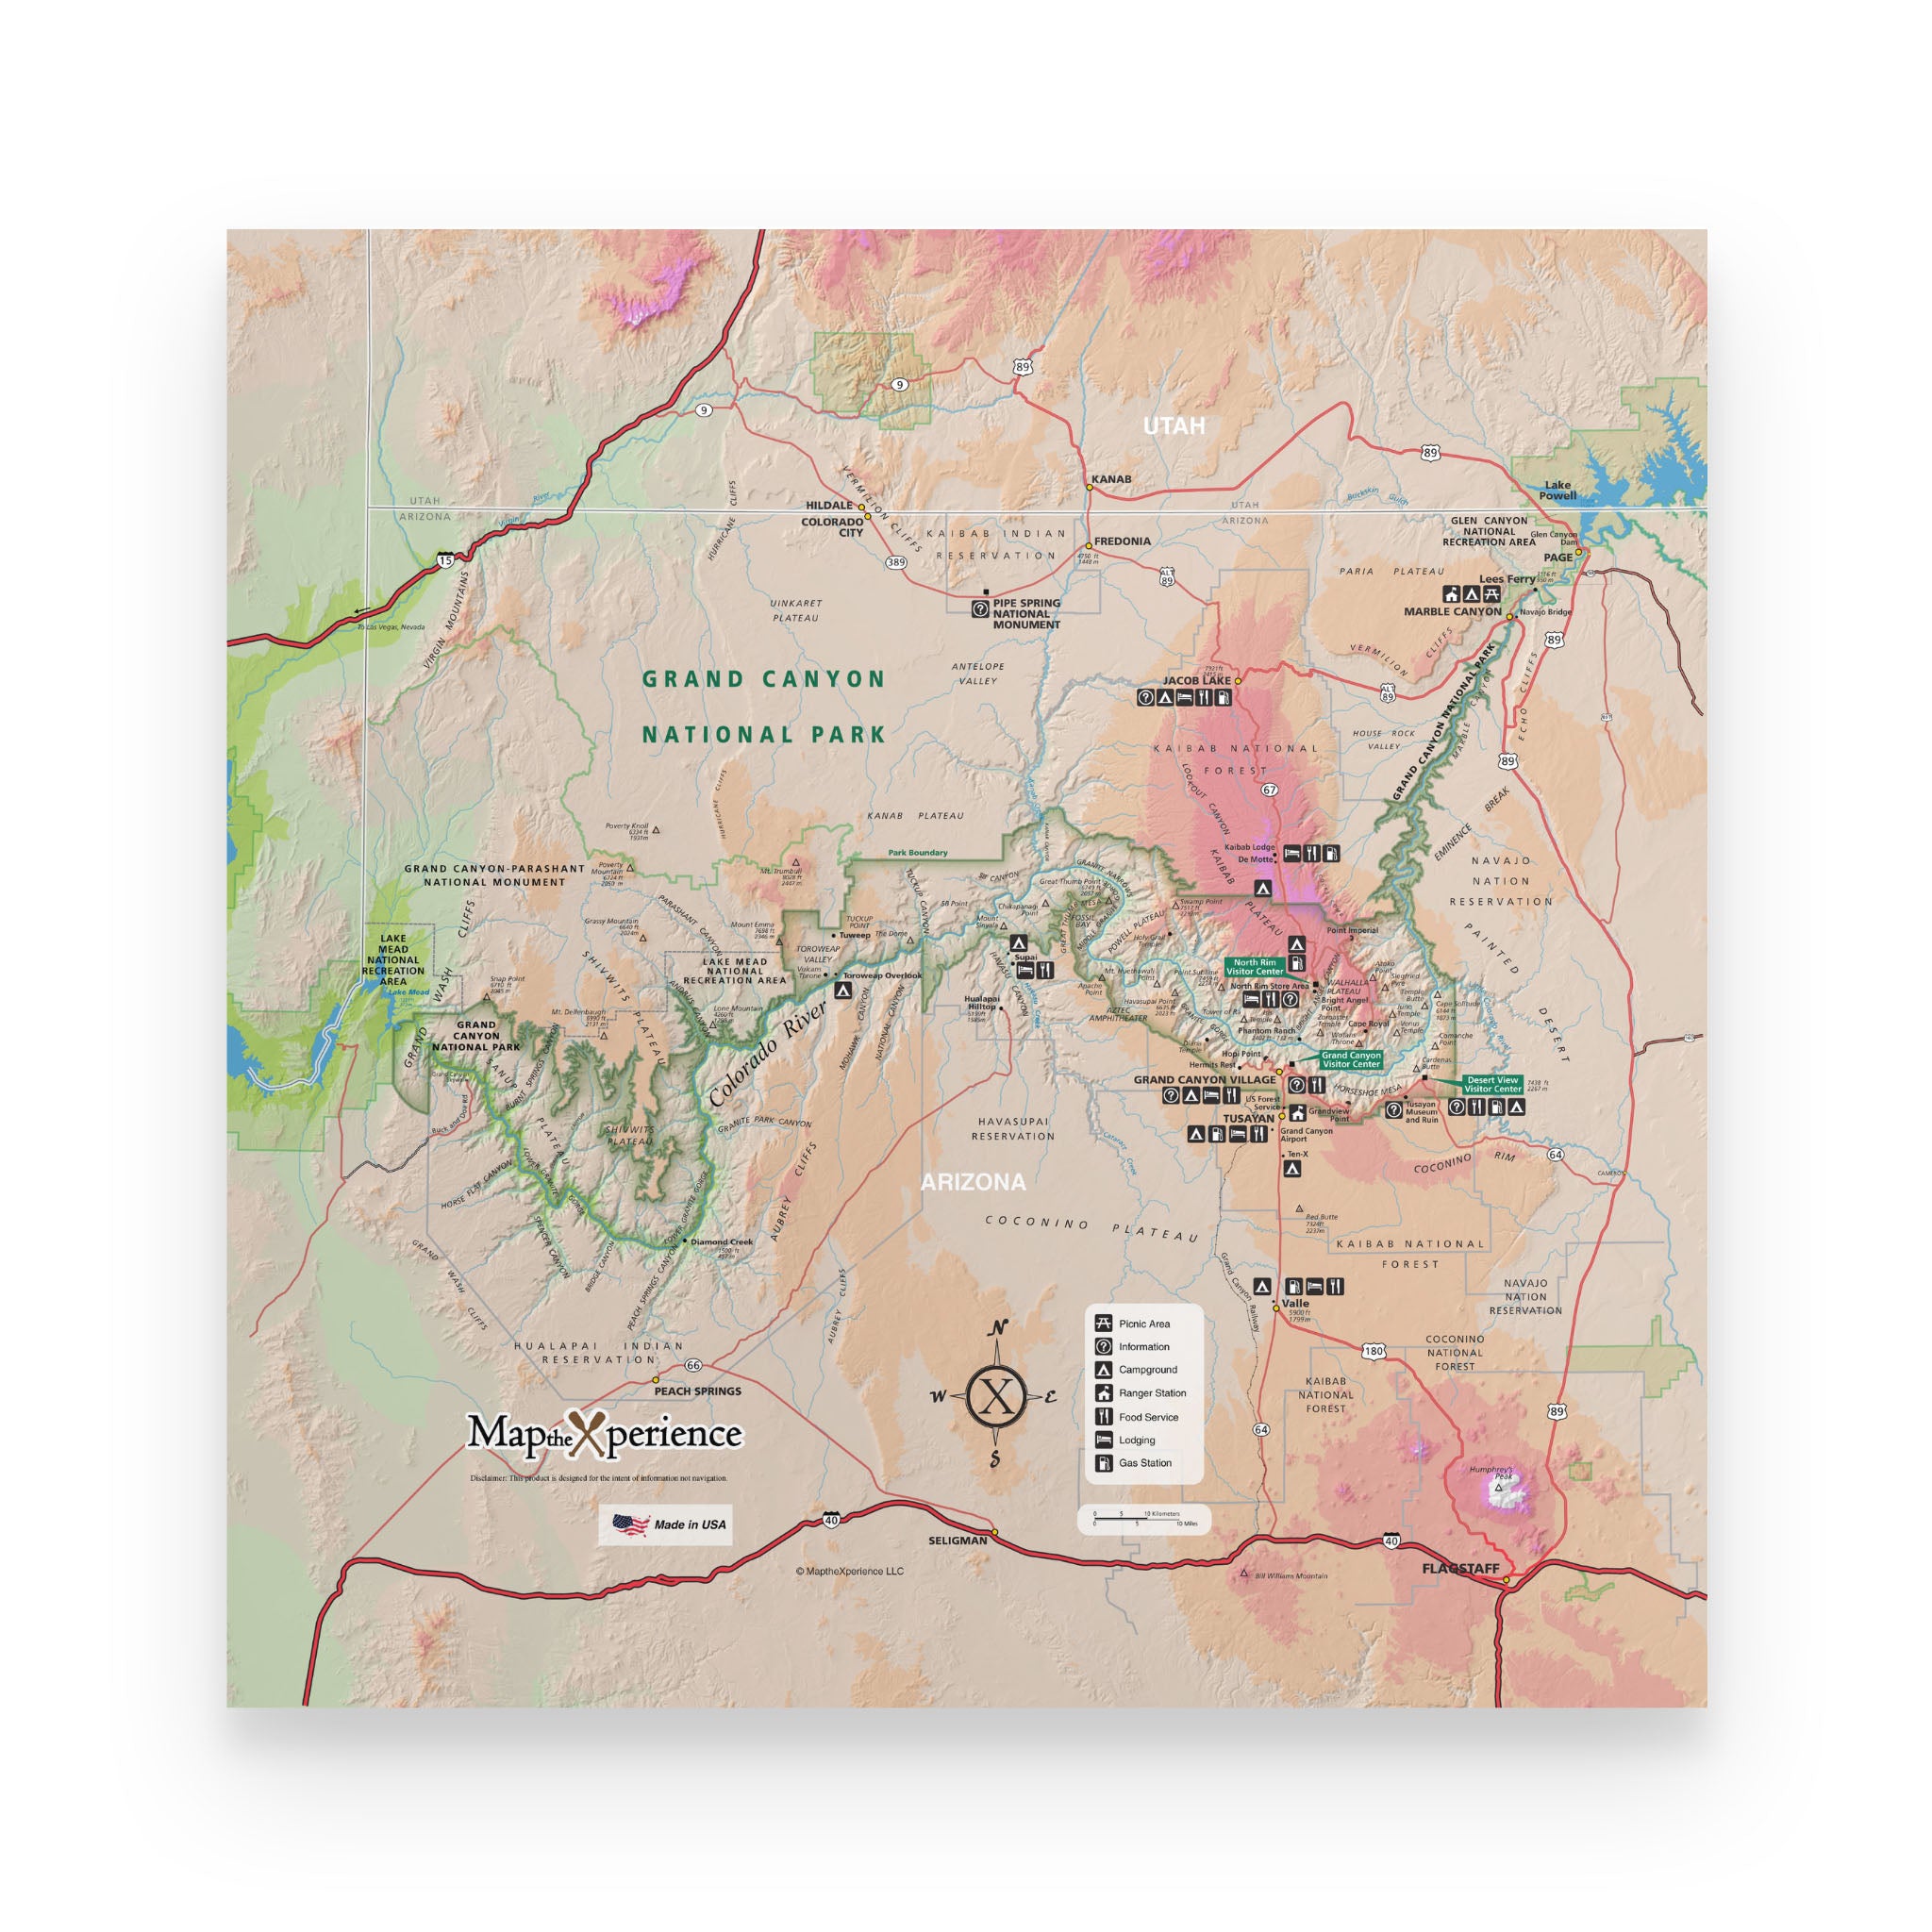 Grand Canyon National Park Map Poster | Free Mobile Map